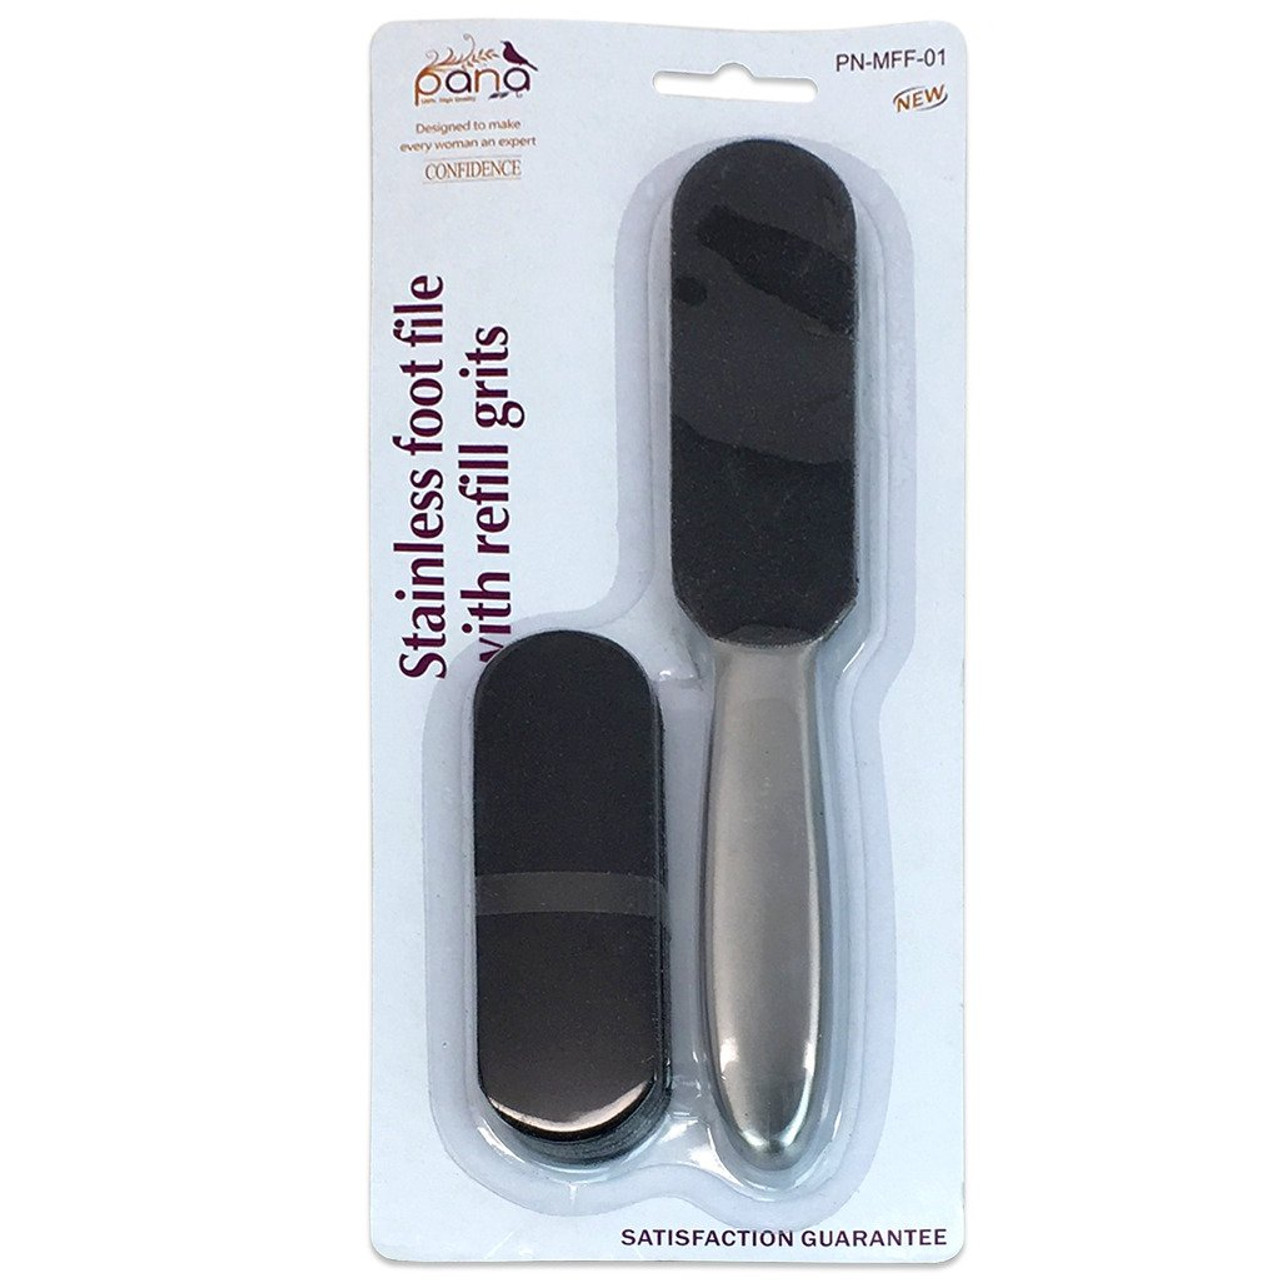 Reusable Stainless Steel Foot File - Beauticom, Inc.